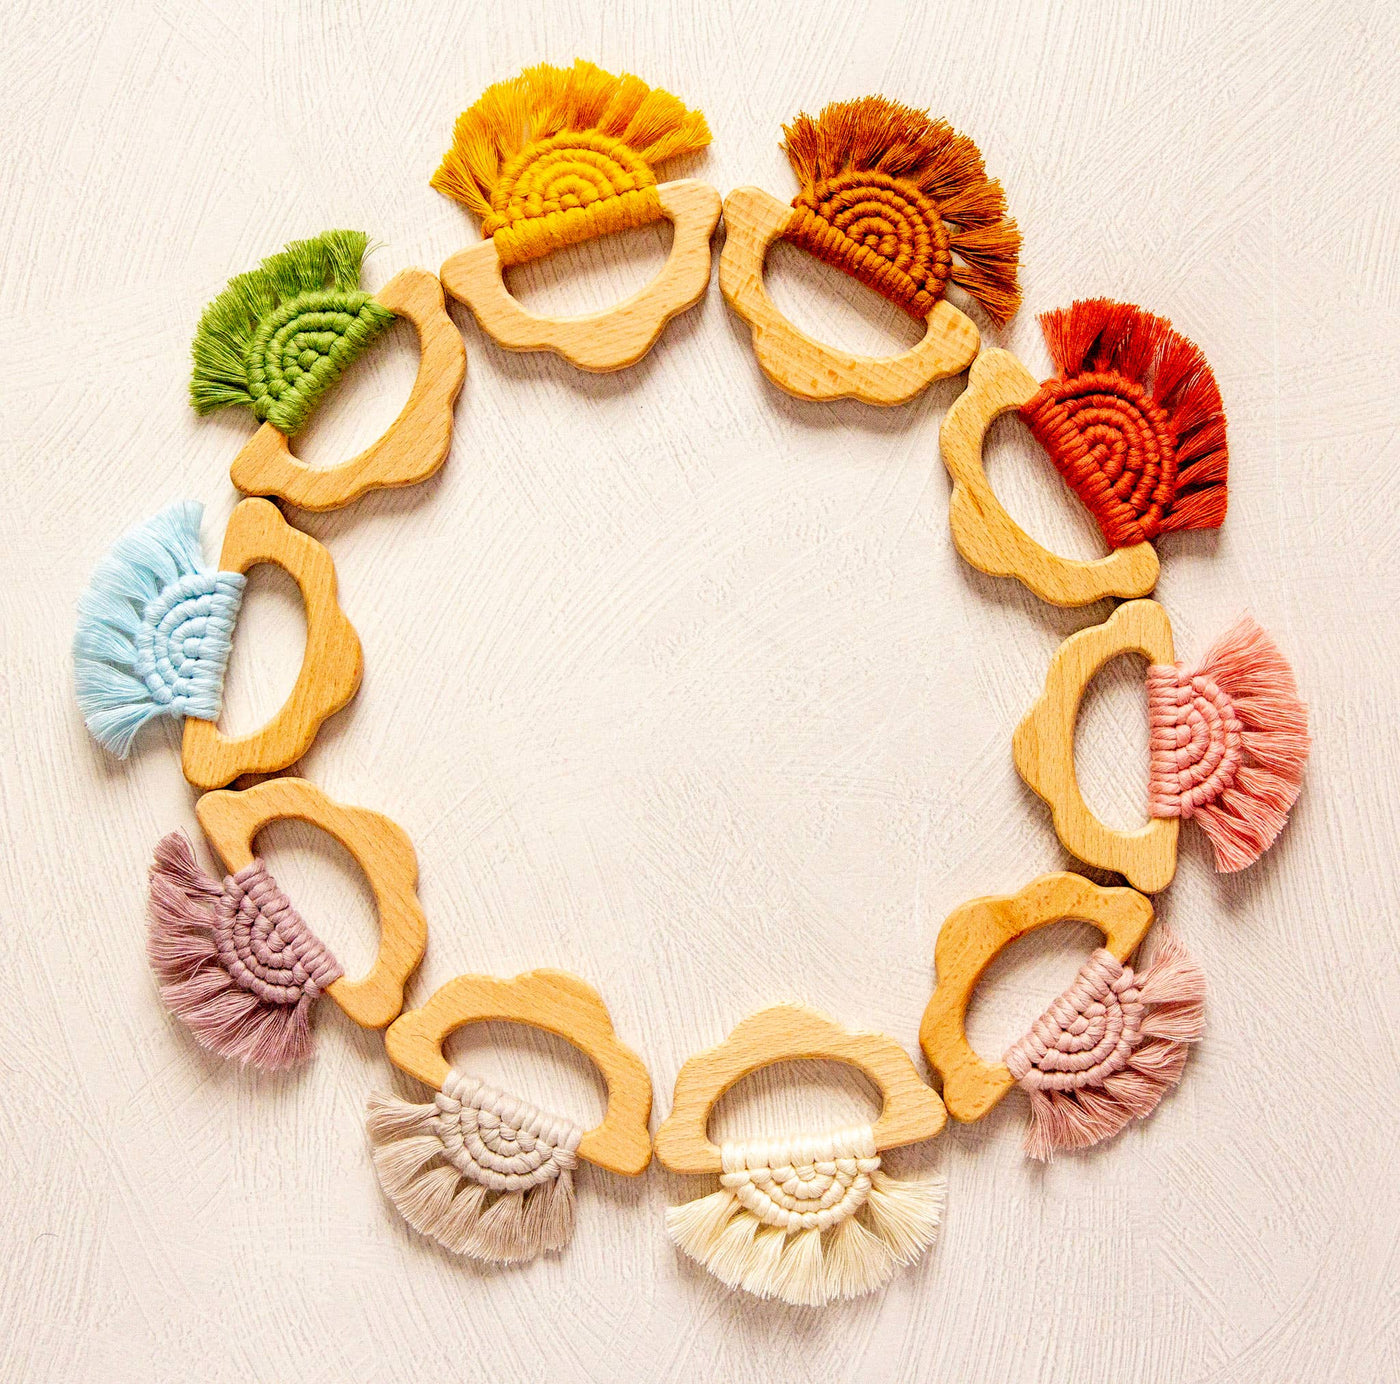 Organic Wood Cloud Teether for Babies - 10 pack assortment